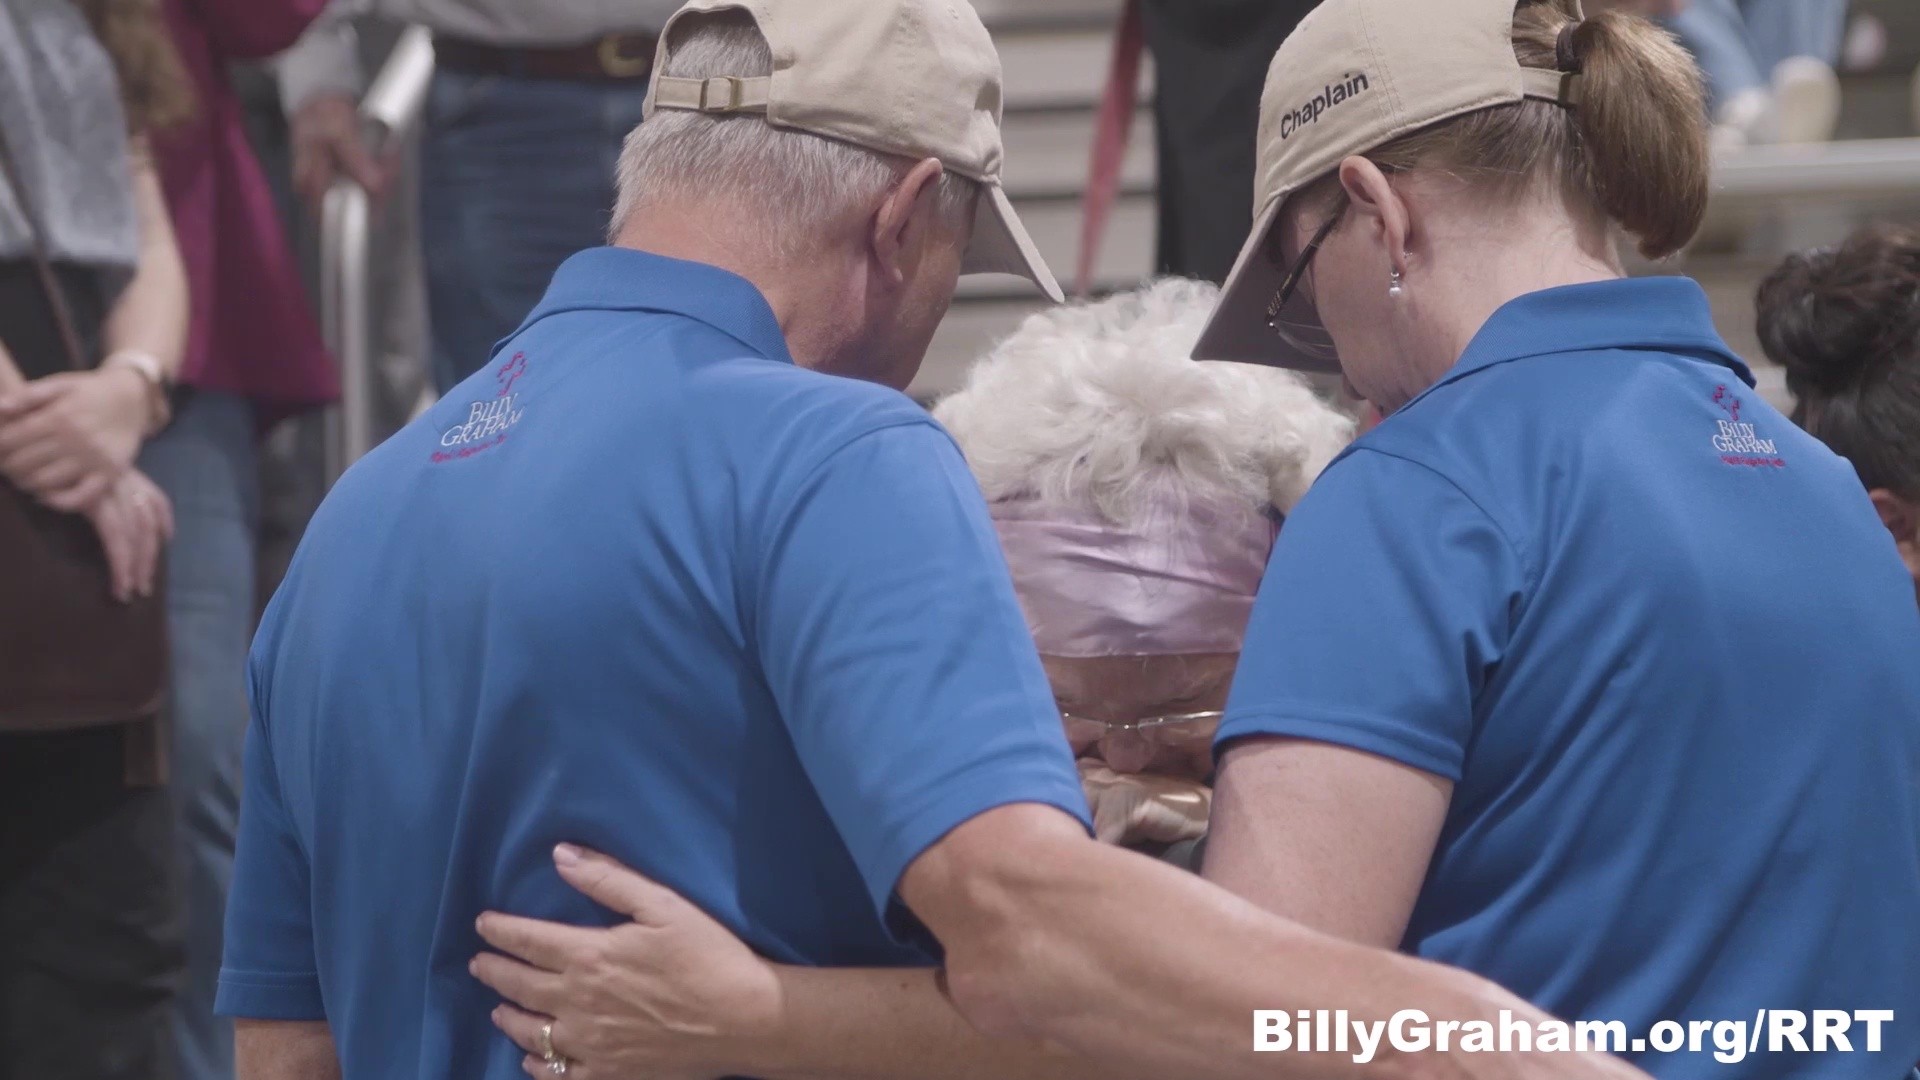 Billy Graham Chaplains are with the community of Uvalde in Texas as they process through grief and trauma from the recent school shooting.